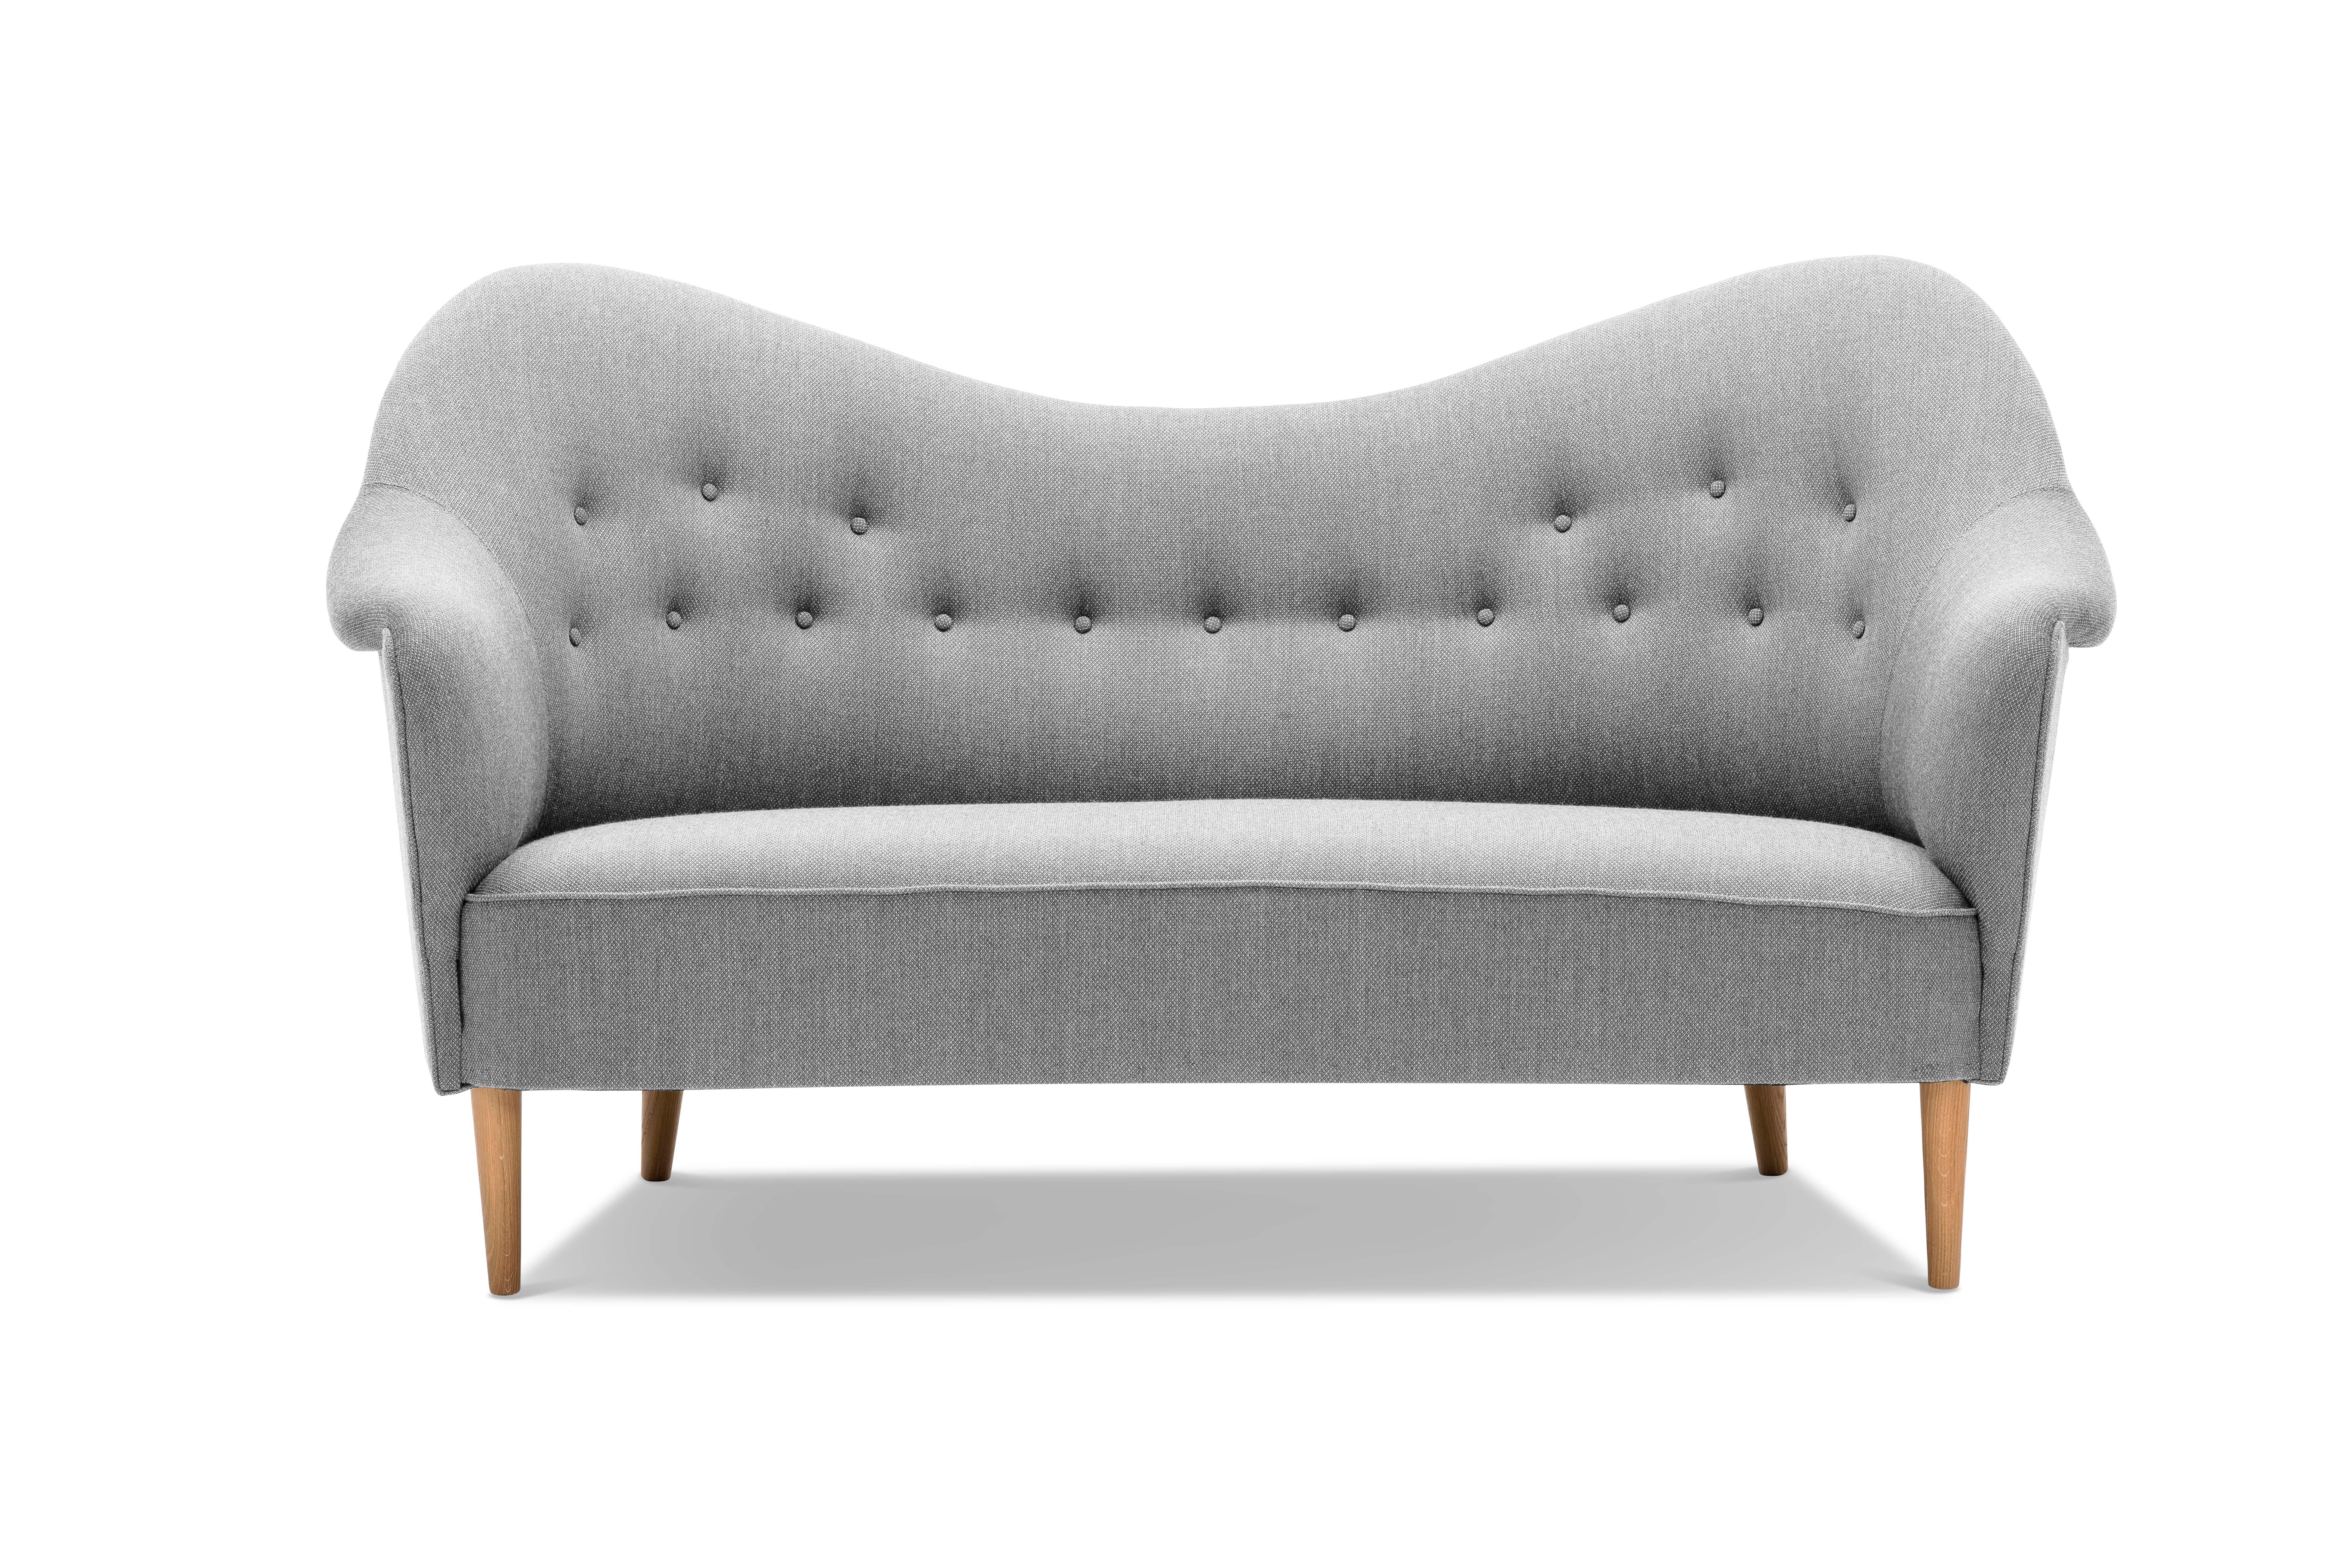 The sofa Samspel was designed by Carl Malmsten in 1956 and was then produced by the furniture company AB Record in Bollnäs. After many years of hibernation, O.H. Sjögren resumed production of the sofa in 2016. The sofa was displayed at the Stockholm